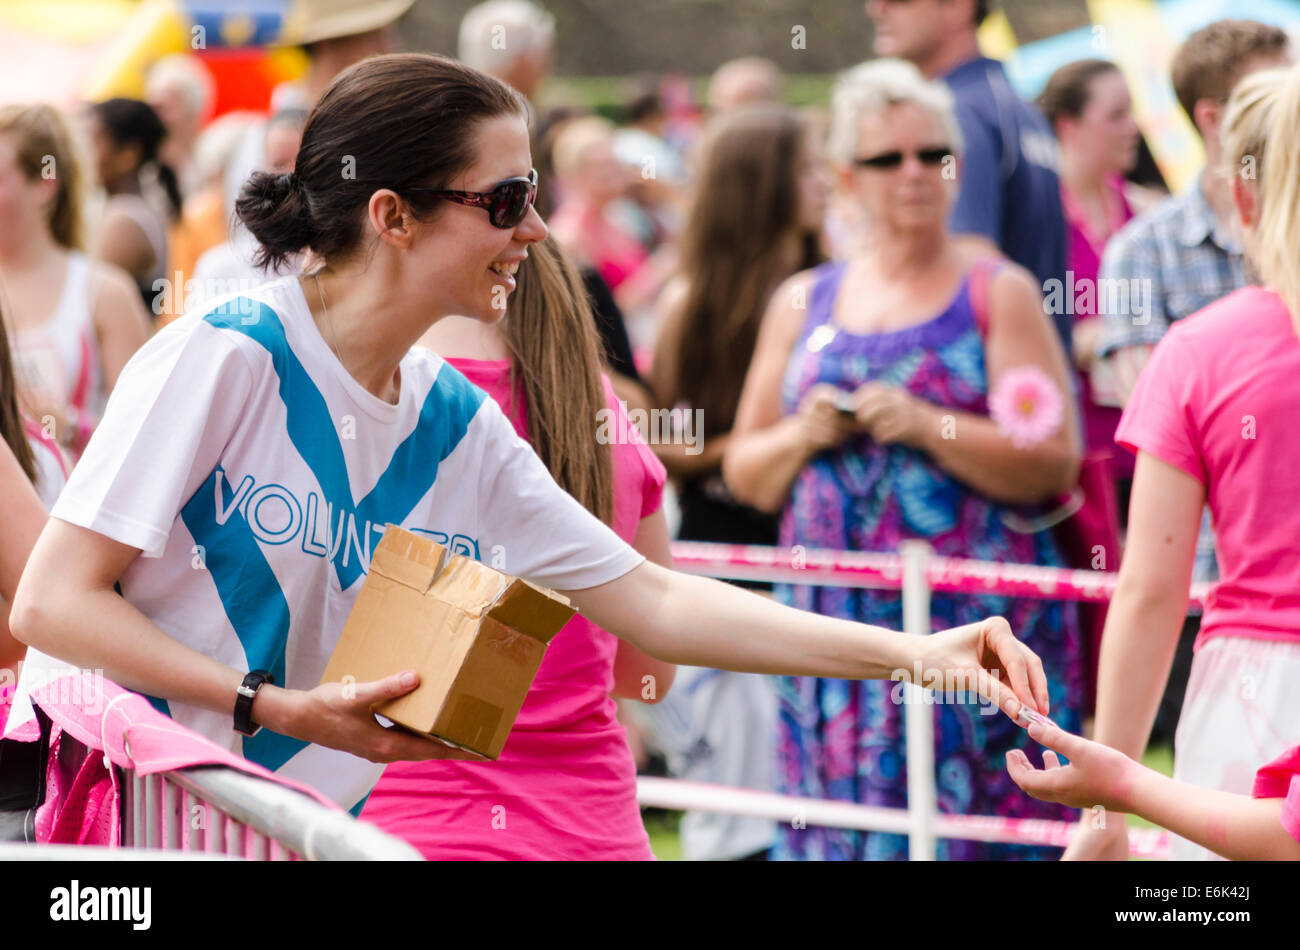 Woman handing out medals at Race-for-Live event, UK 2014 Stock Photo